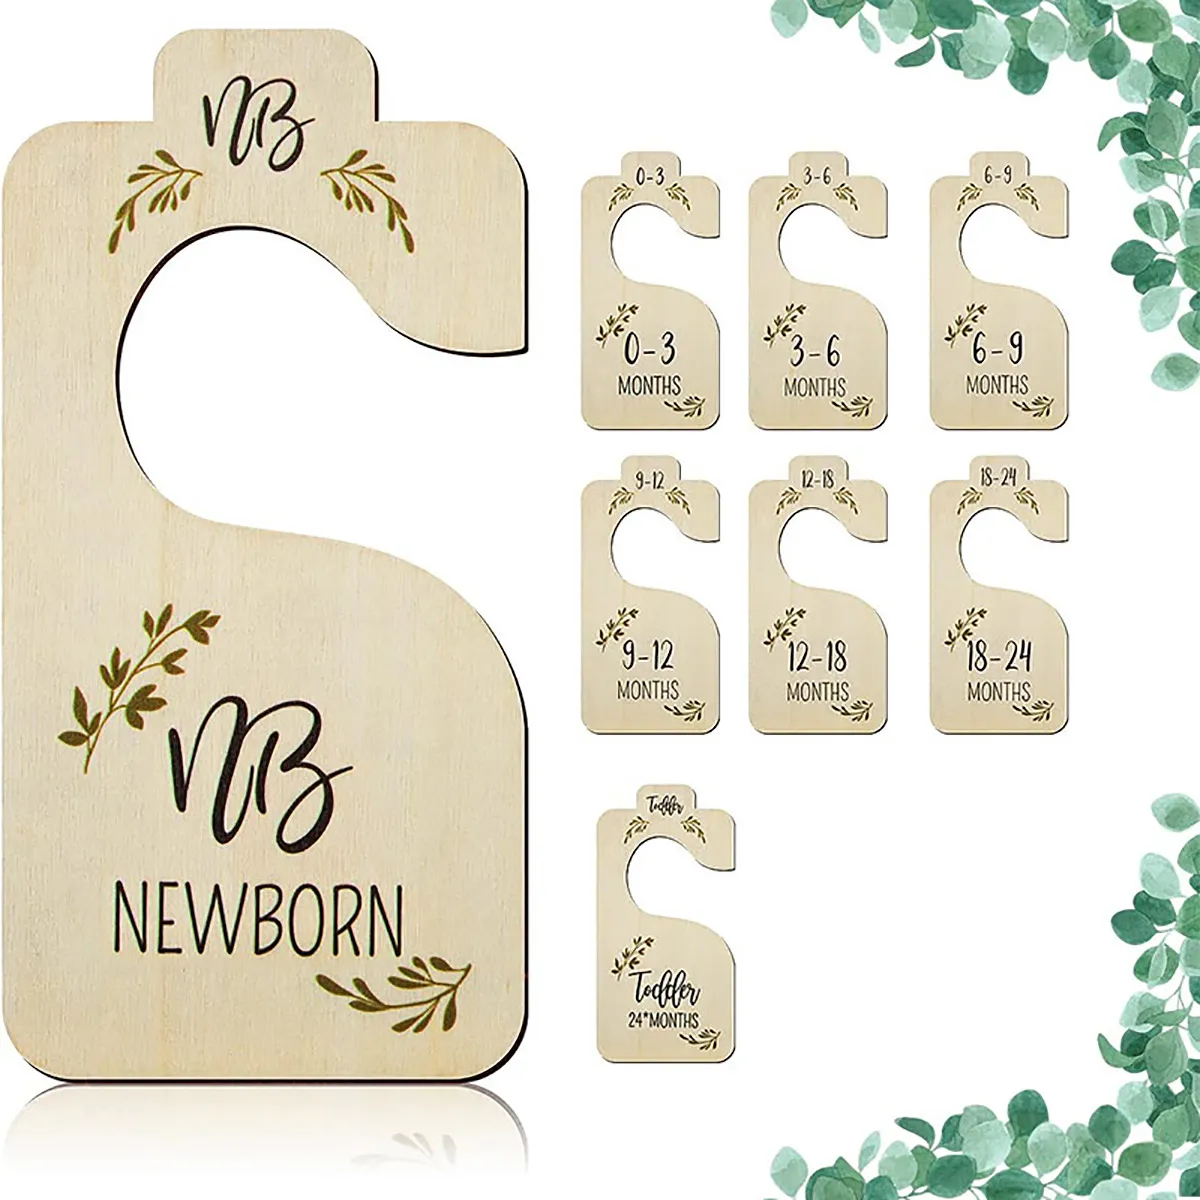  Beautiful Wooden Baby Closet Dividers - Double-Sided Organizer  for Newborn to 24 Months Size Clothes - Adorable Nursery Decor Hanger  Dividers Easily Organize Your Little Baby Girls or Boys Room : Baby